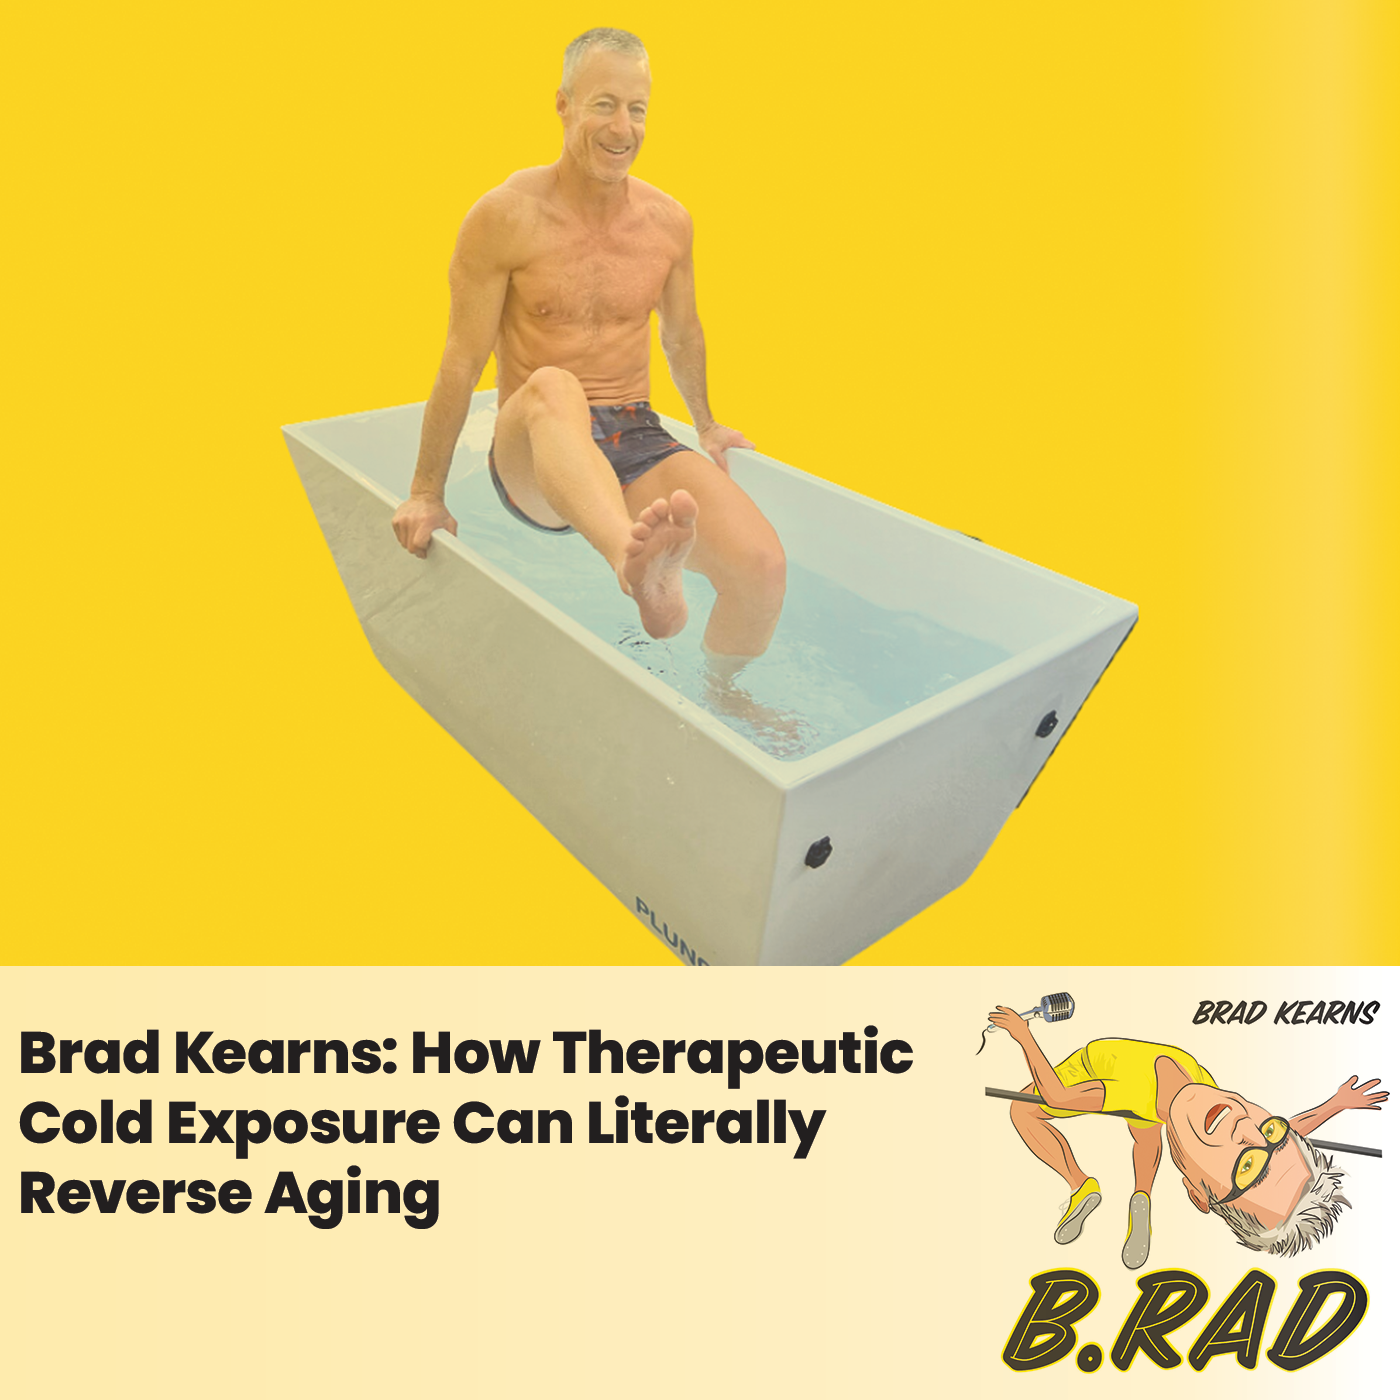 Brad Kearns: How Therapeutic Cold Exposure Can Literally Reverse Aging